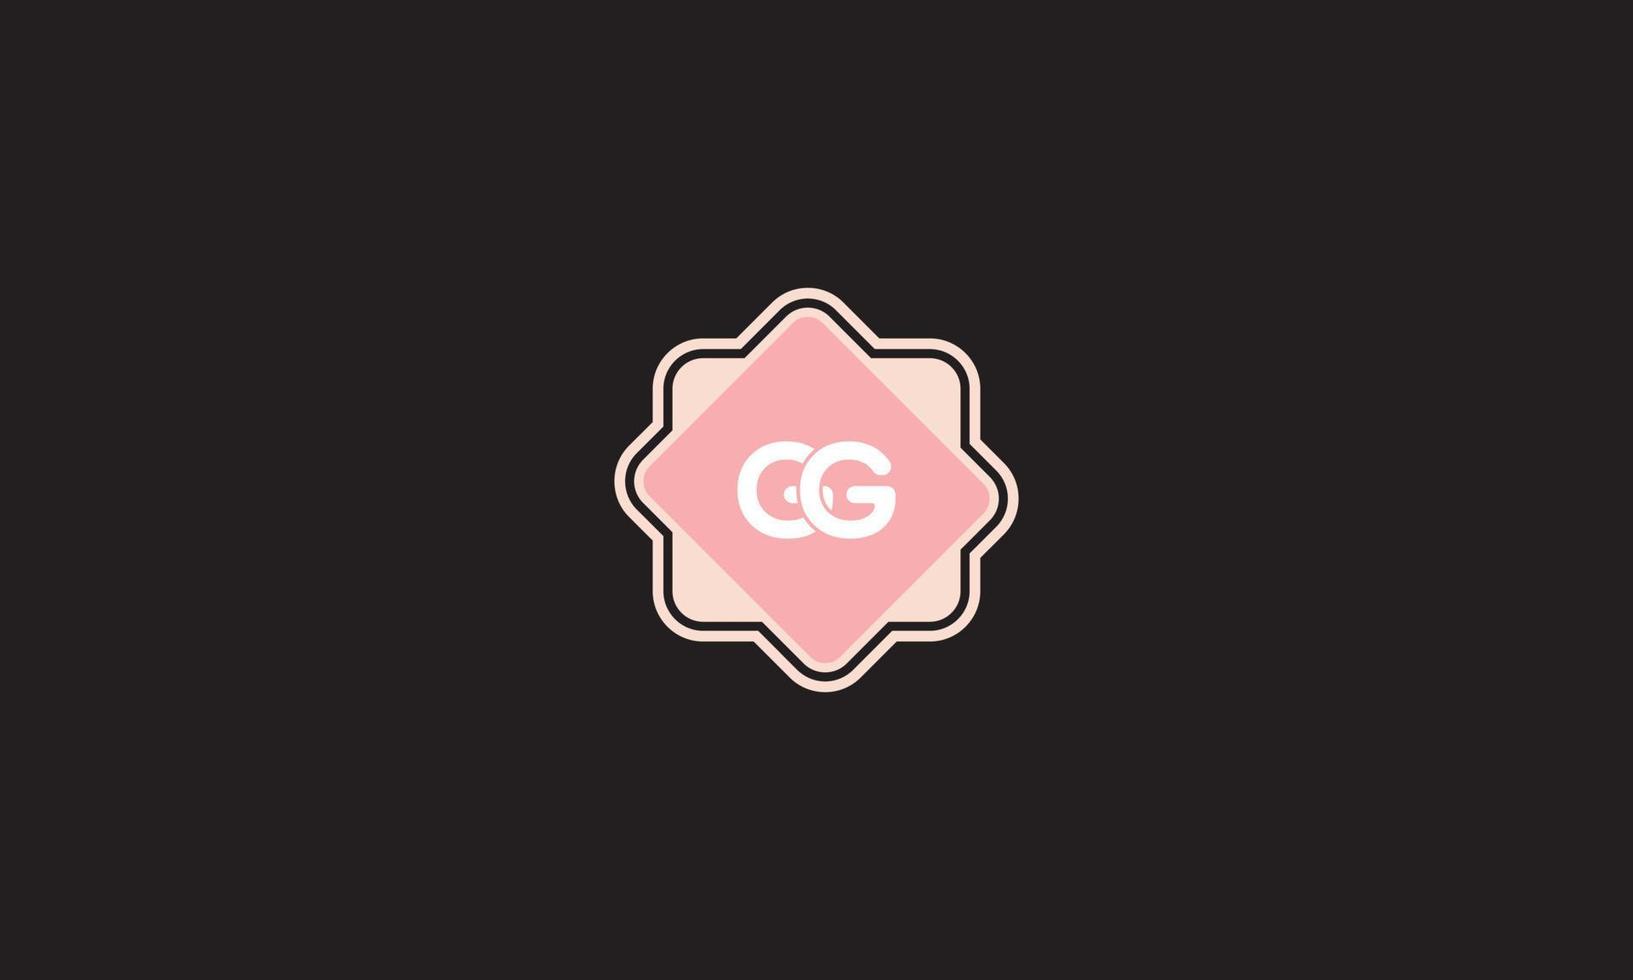 Letter GG logo with geometric shapes vector free vector template.